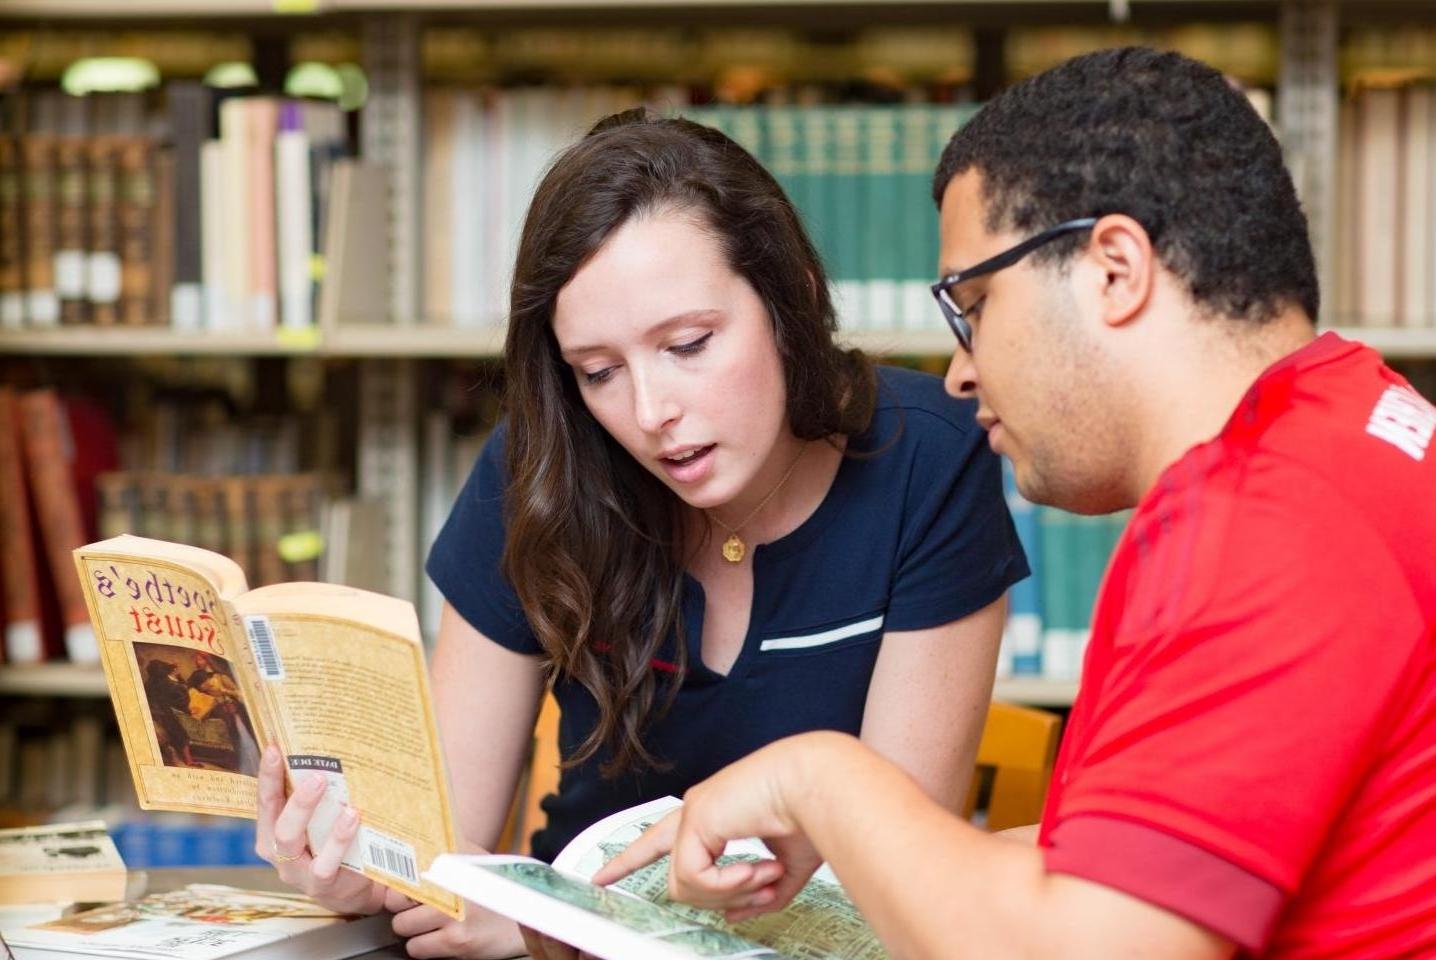 Two students look at map inside of a book